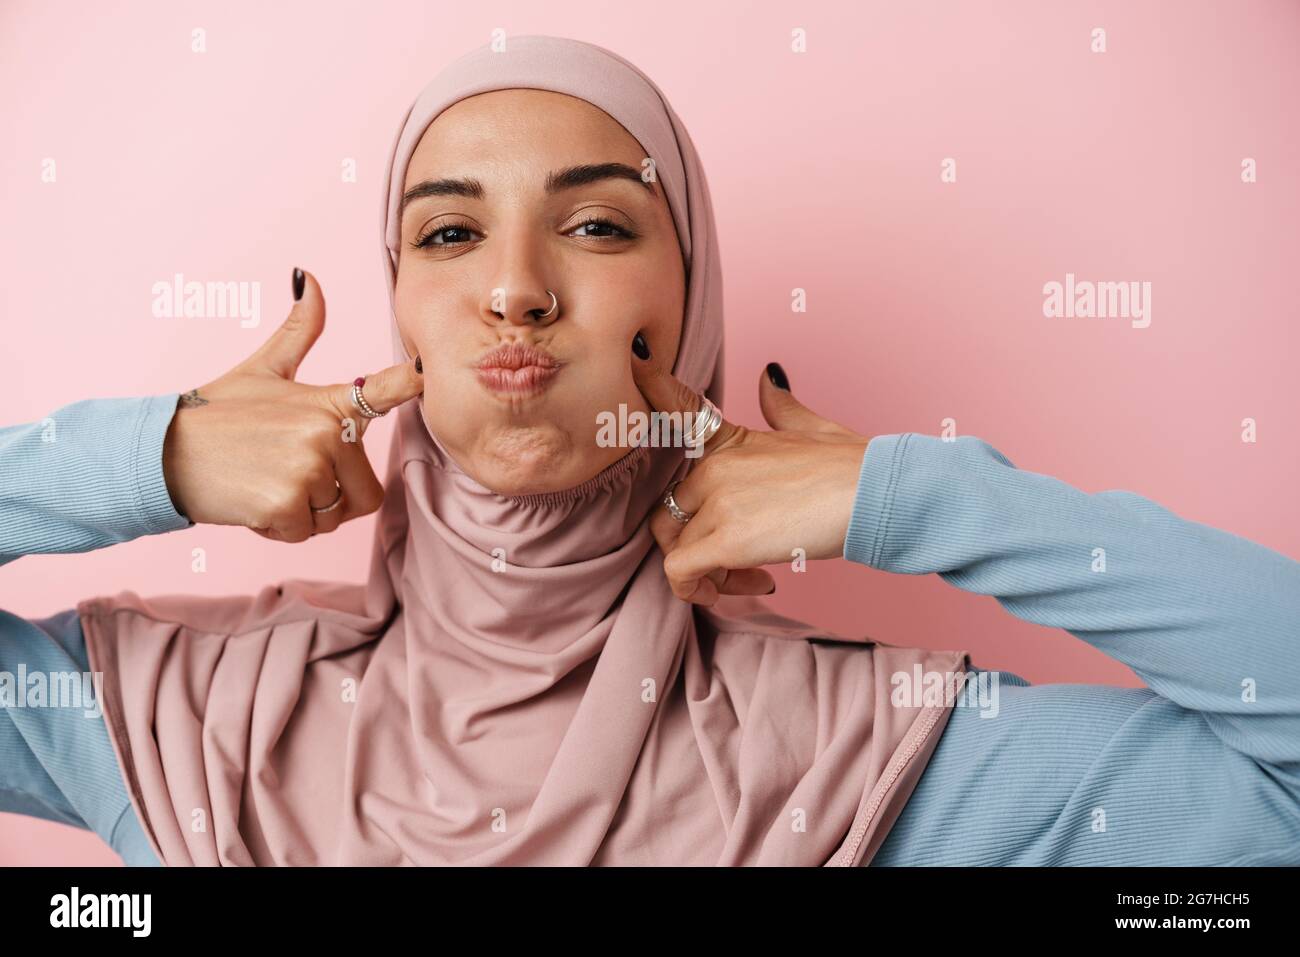 A portrait of the positive muslim woman wearing pink hijab puffed out cheeks while standing in the pink studio Stock Photo